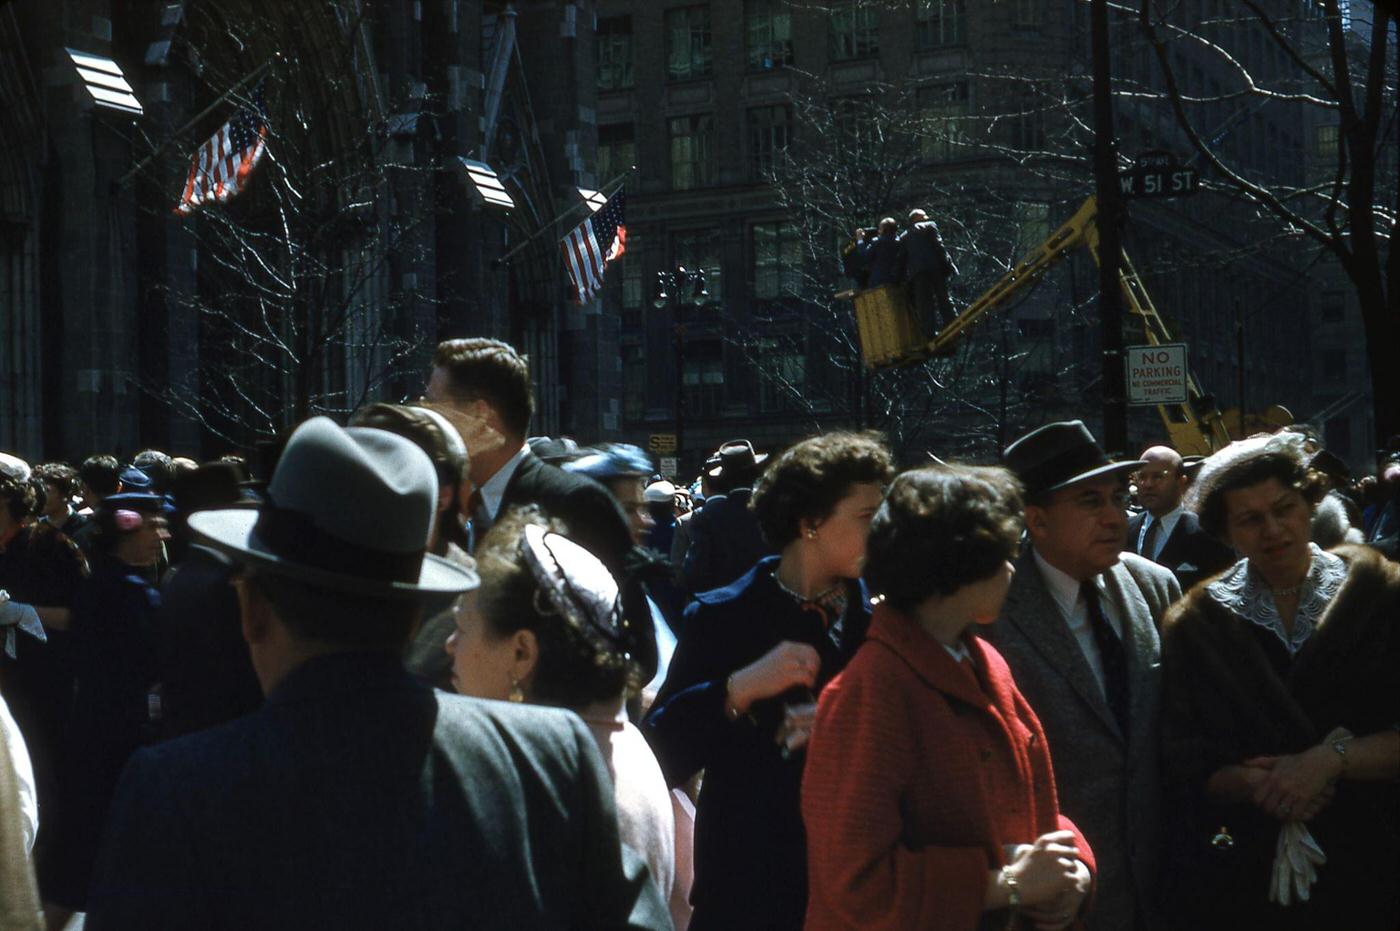 Wpix Cameras Filming Crowds At St Patrick'S Cathedral, Nyc Easter Parade, Manhattan, 1955.